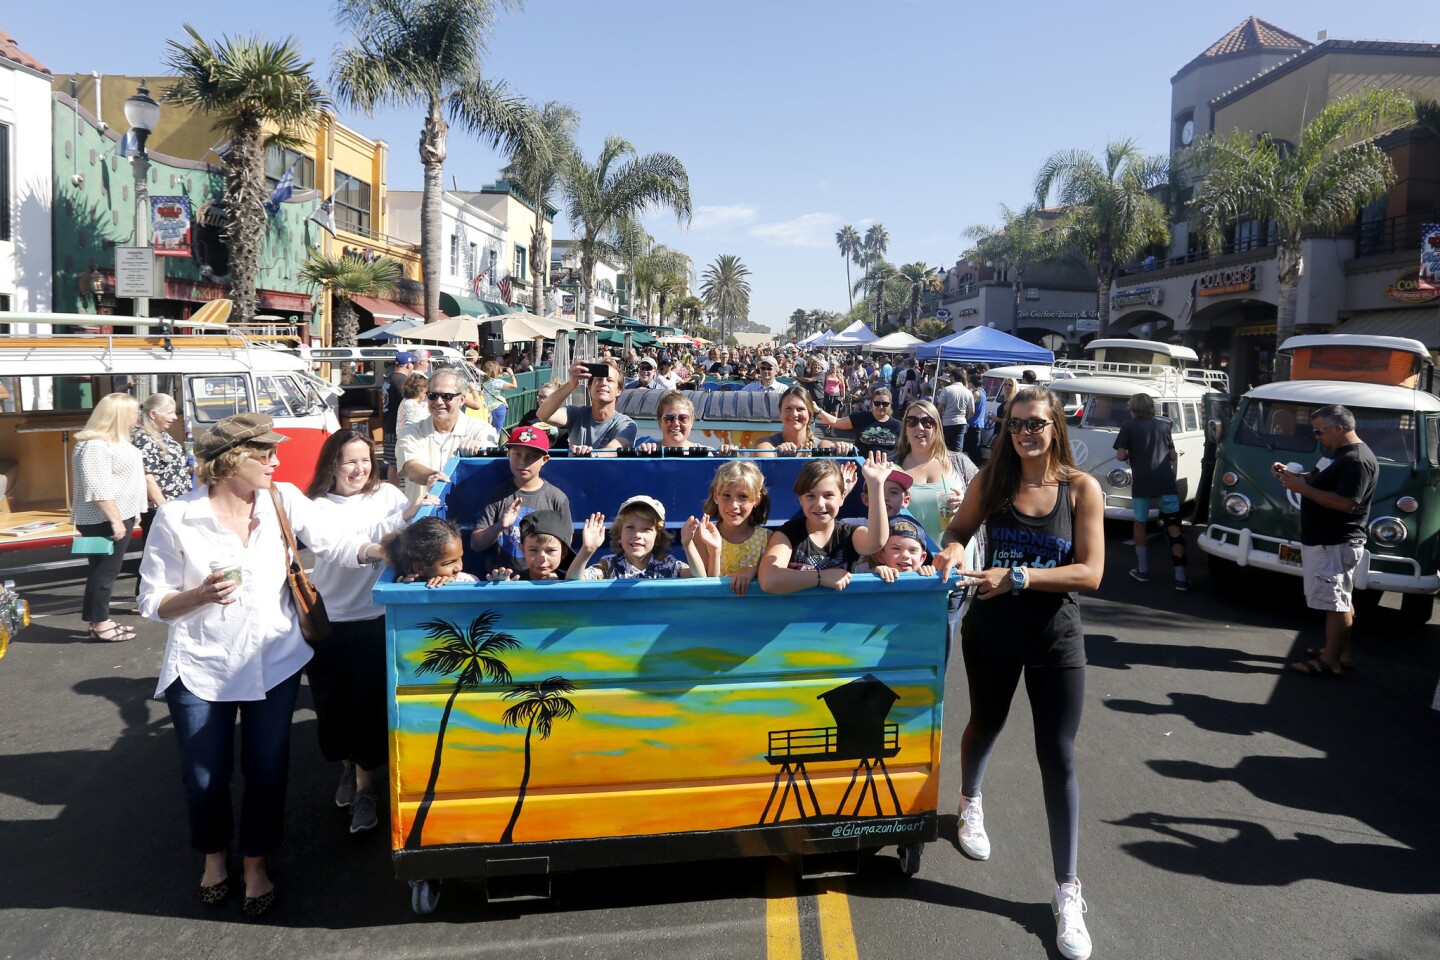 Children ride local artist Laura Svette's creation during the Huntington Beach Public Art Alliance's Dumpsters on Parade and Main Street Art Show event, in Huntington Beach, on Saturday. Thirty trash dumpsters were hand painted by local artists and paraded down the first three blocks of Main Street. The dumpsters will be placed around downtown to beautify the area.